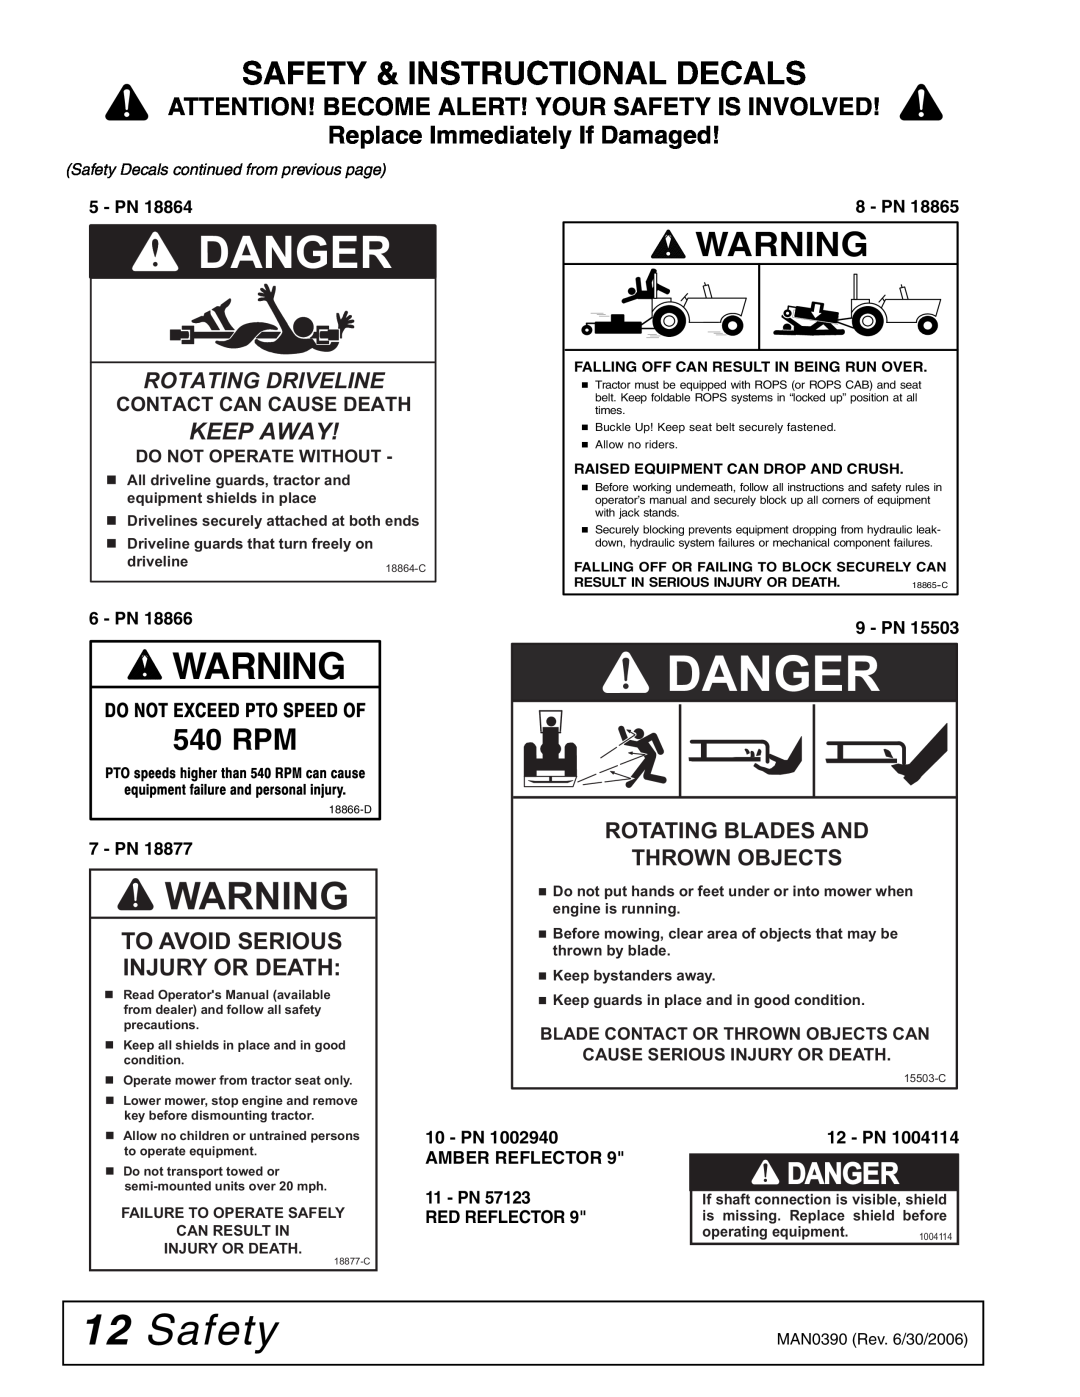 Woods Equipment DS96, DS120 Danger, Safety & Instructional Decals, Attention! Become Alert! Your Safety Is Involved 